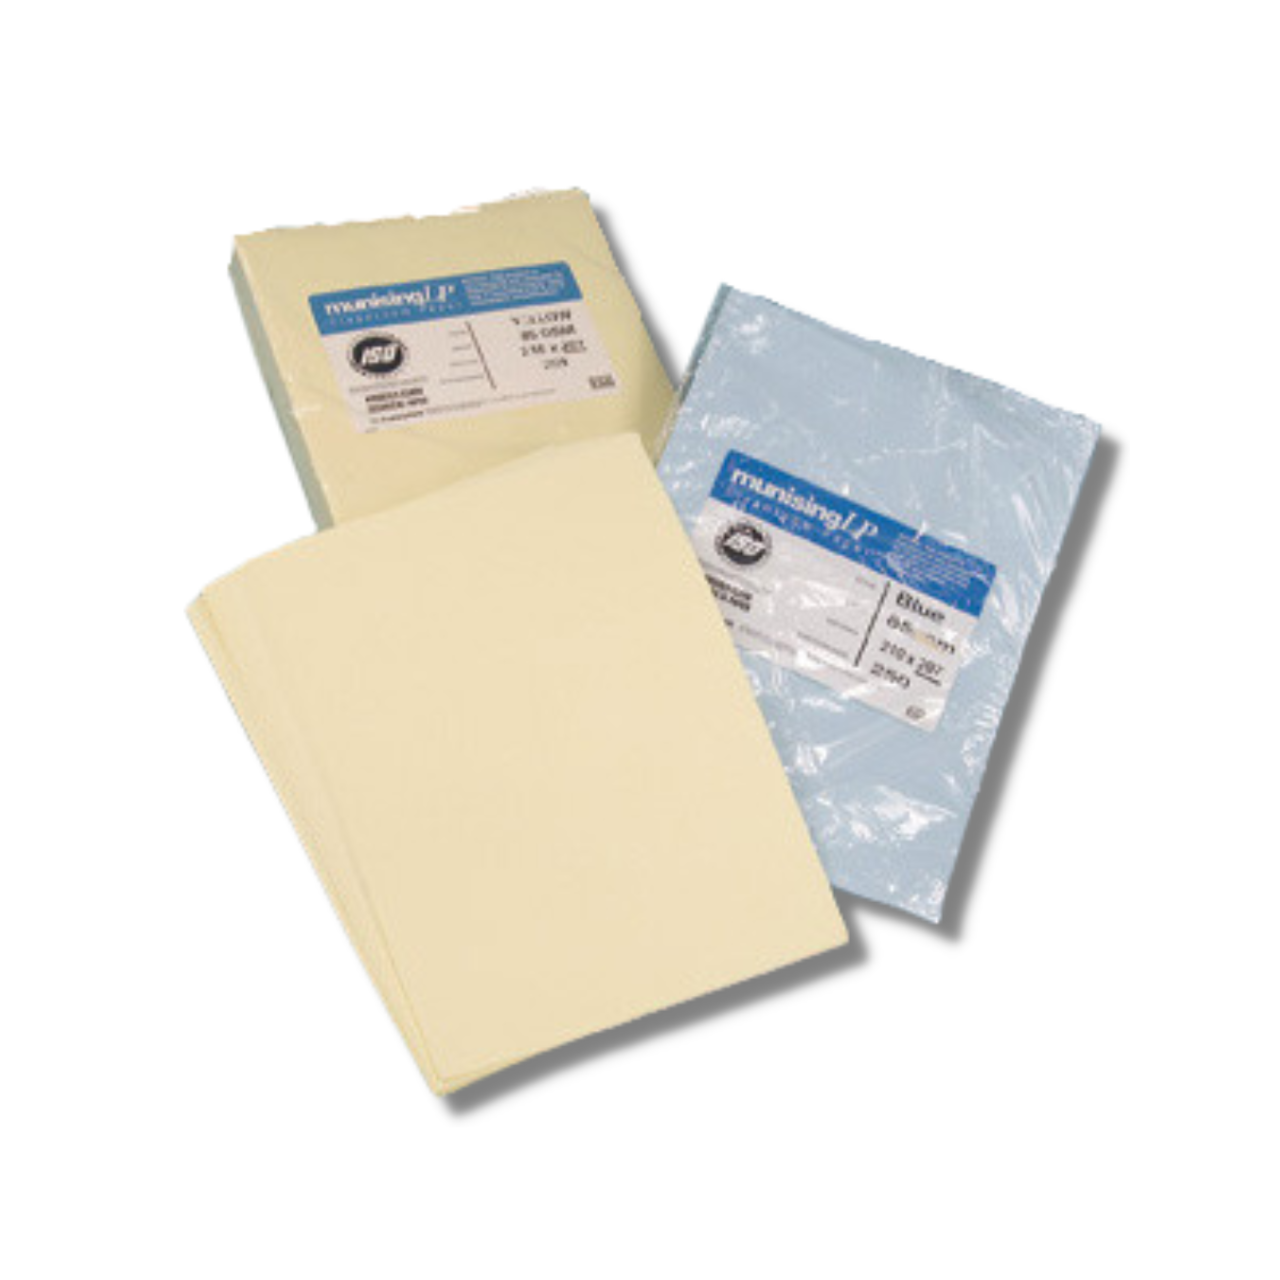 Cleanroom Paper: 8.5x11, White, Autoclavable, 22#, 250 Sheets/Pack- 10  Packs/Case, LT-8511-22W